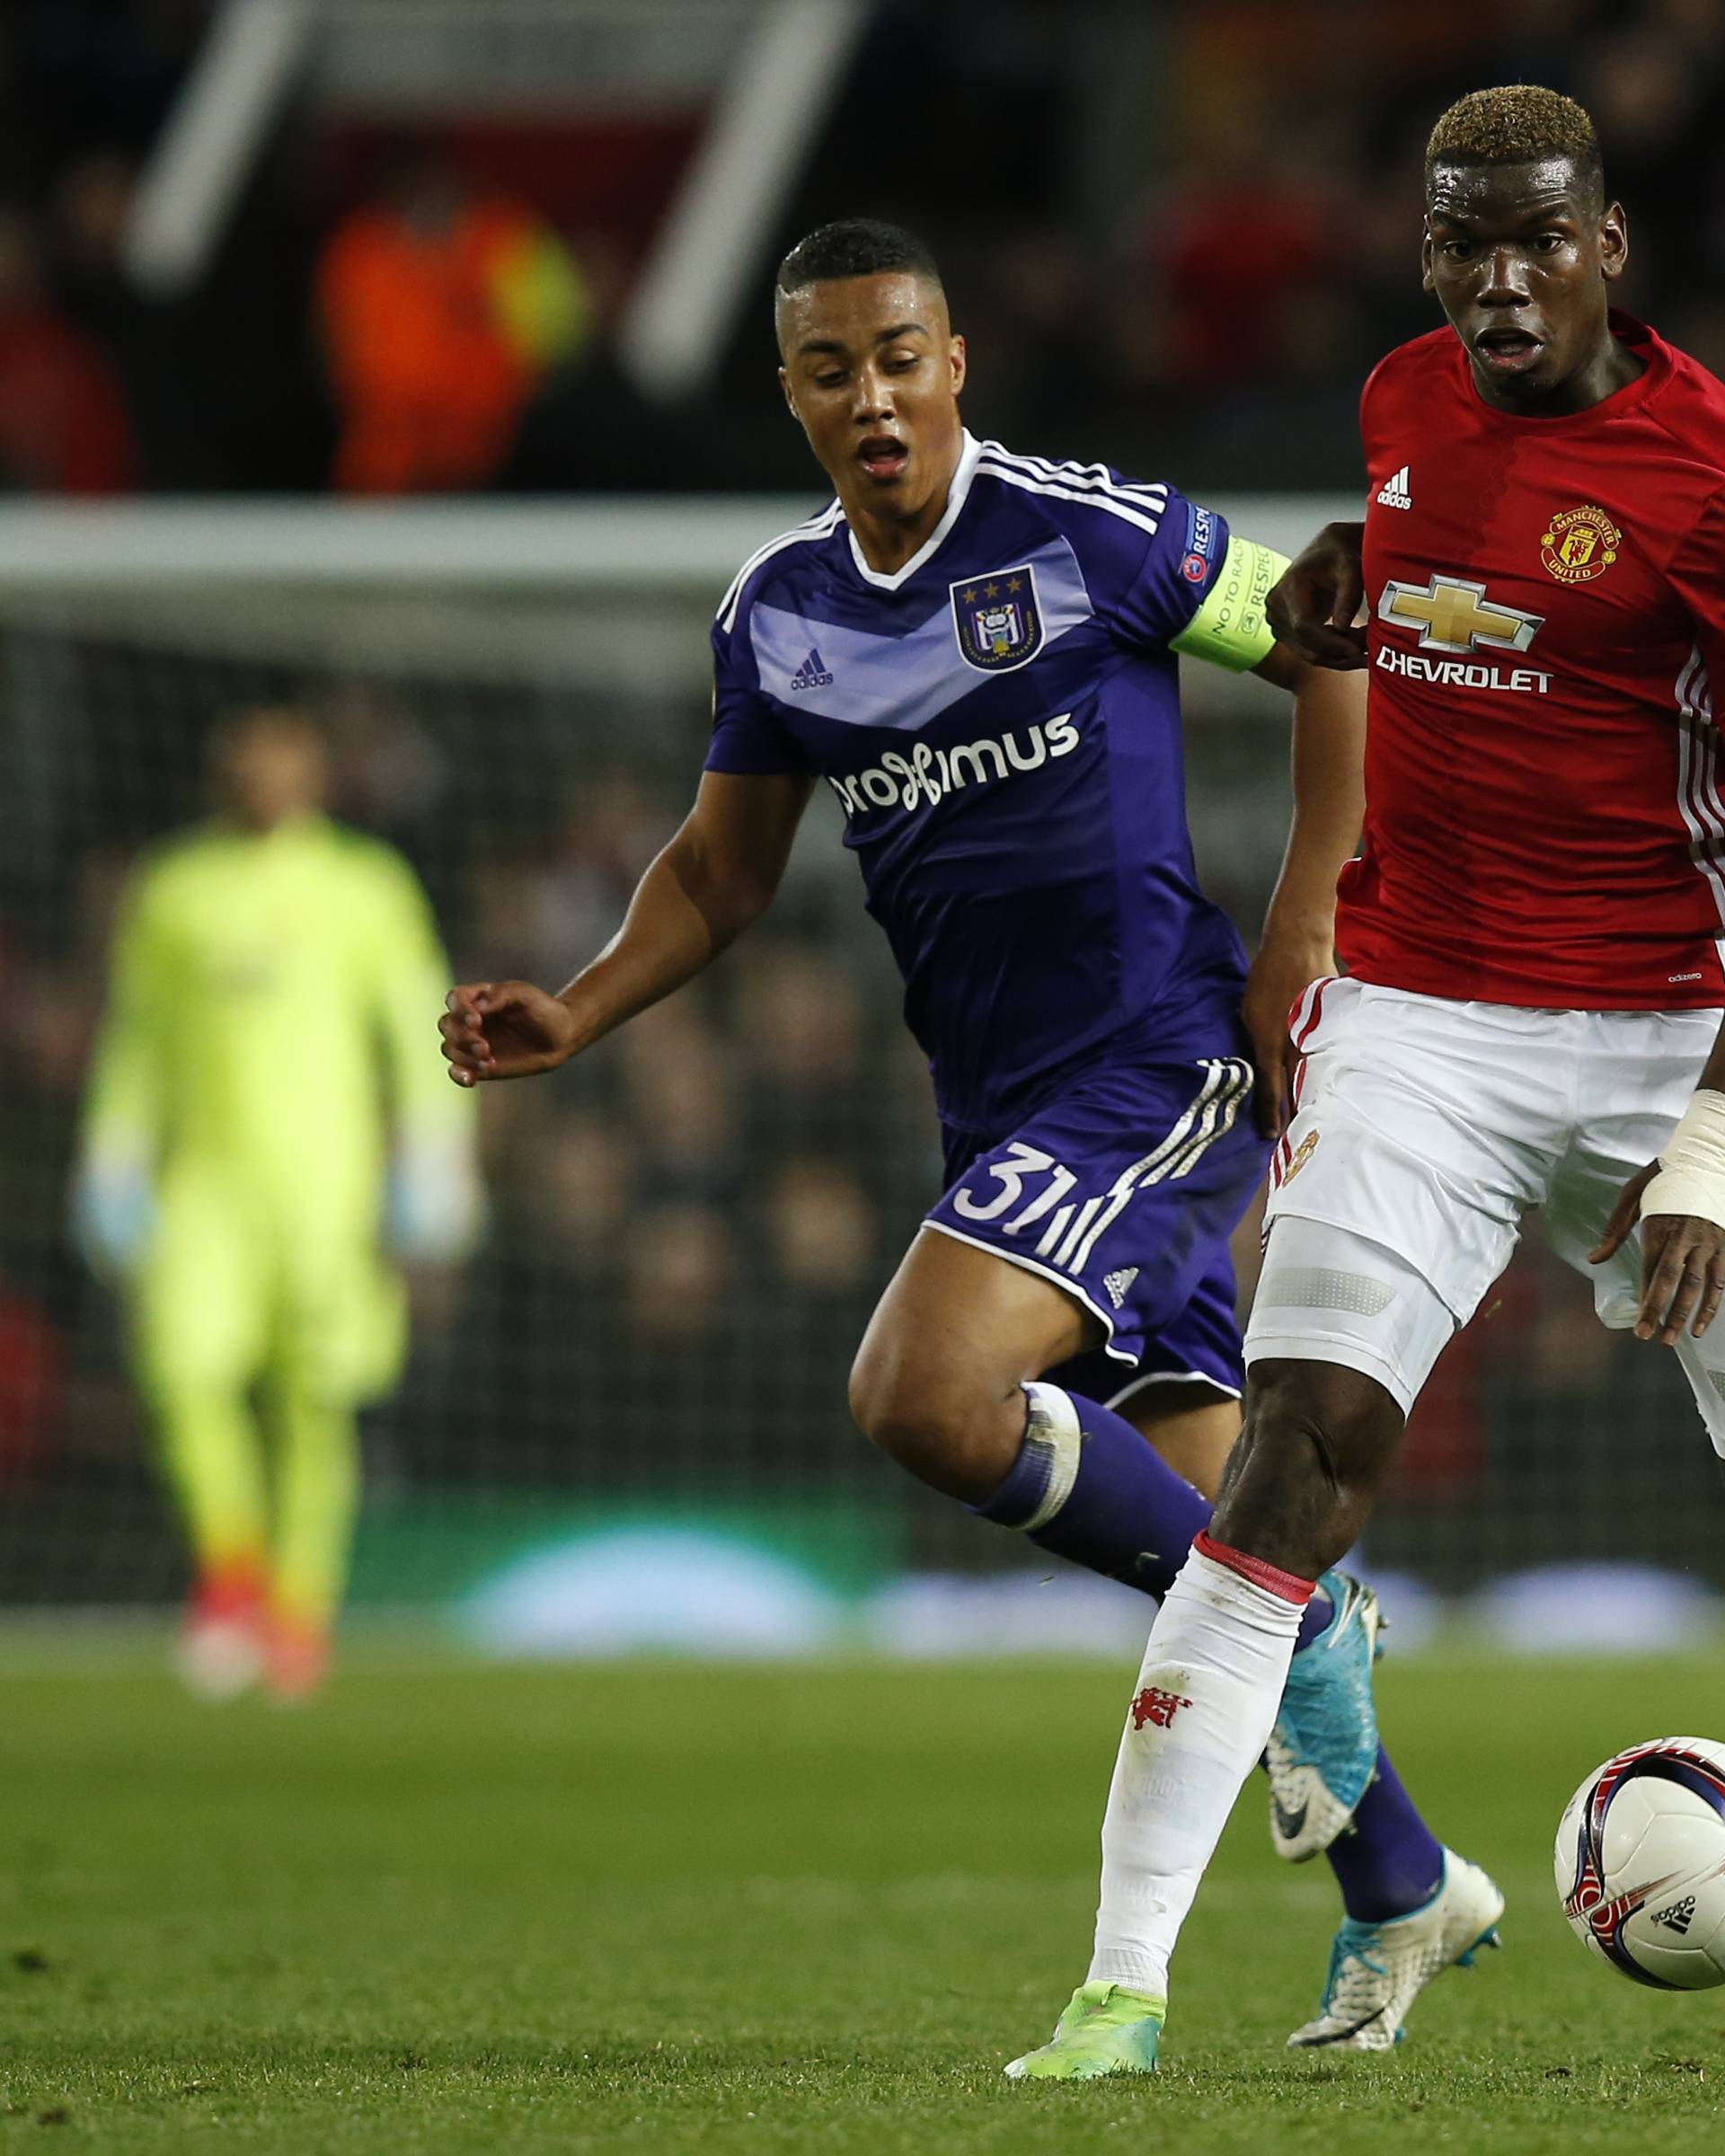 Manchester United's Paul Pogba in action with Anderlecht's Youri Tielemans